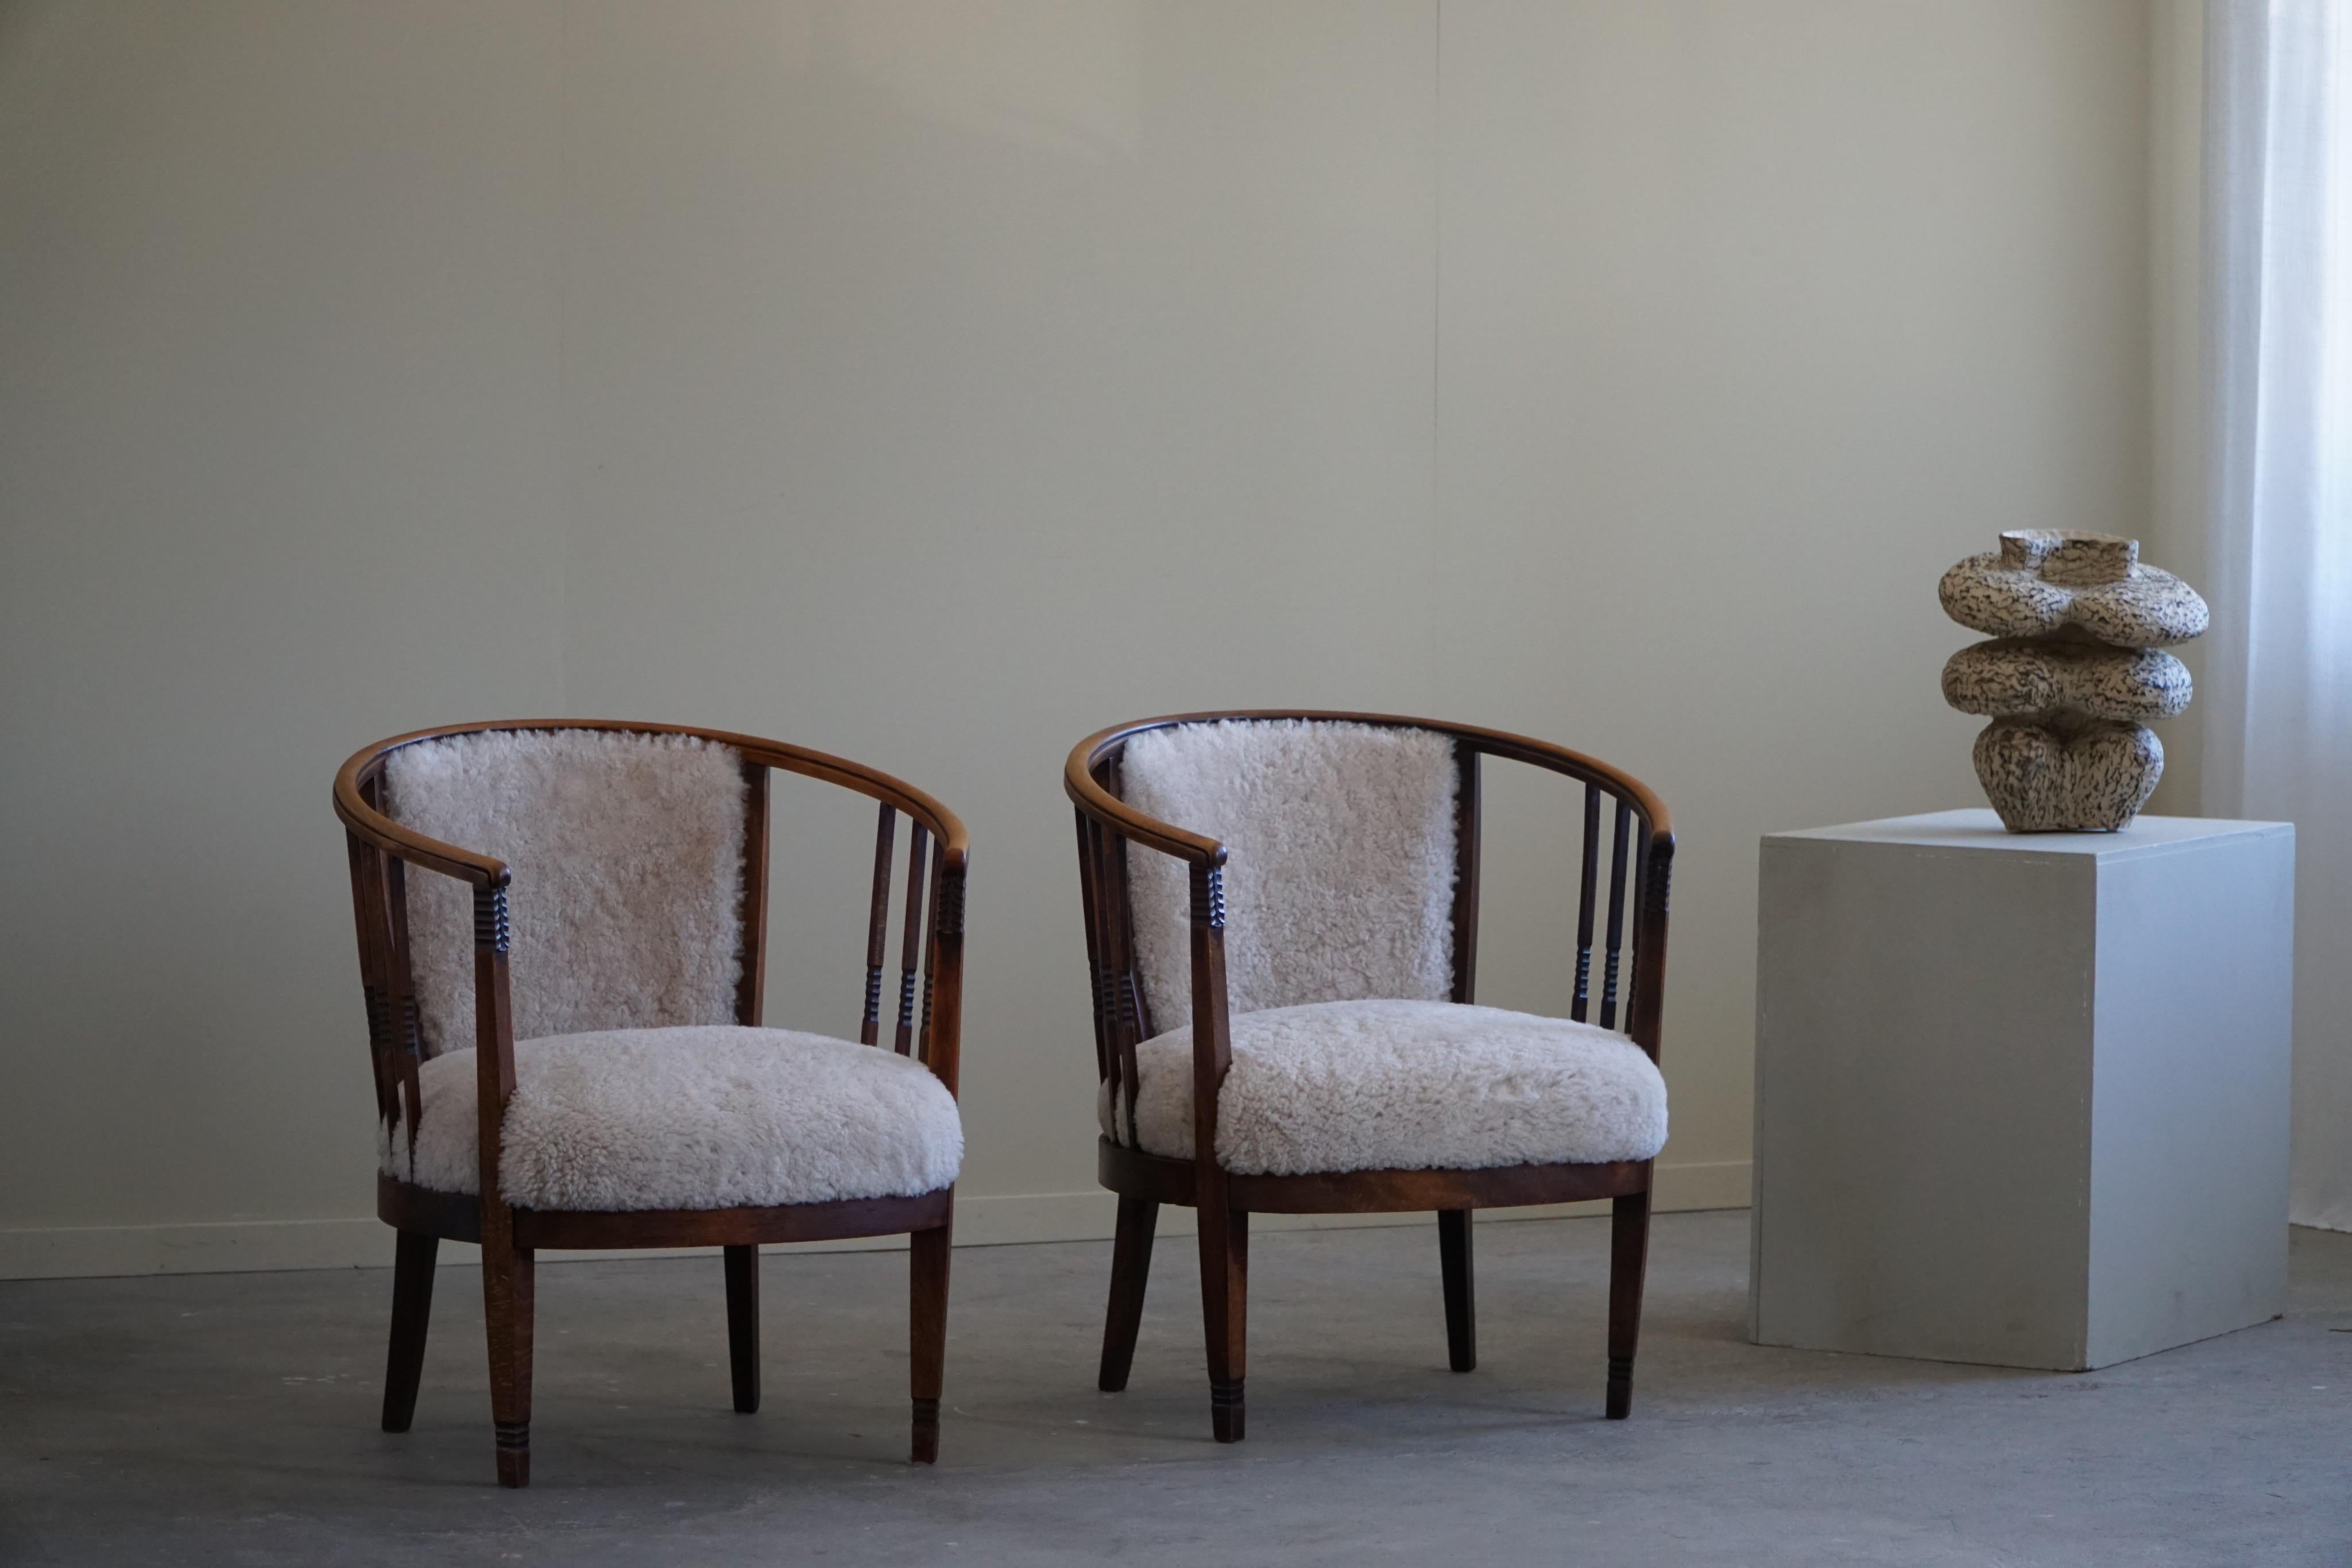 Pair of Danish Armchairs in Beech, Reupholstered Lambswool, Jugendstil, 1900s For Sale 11